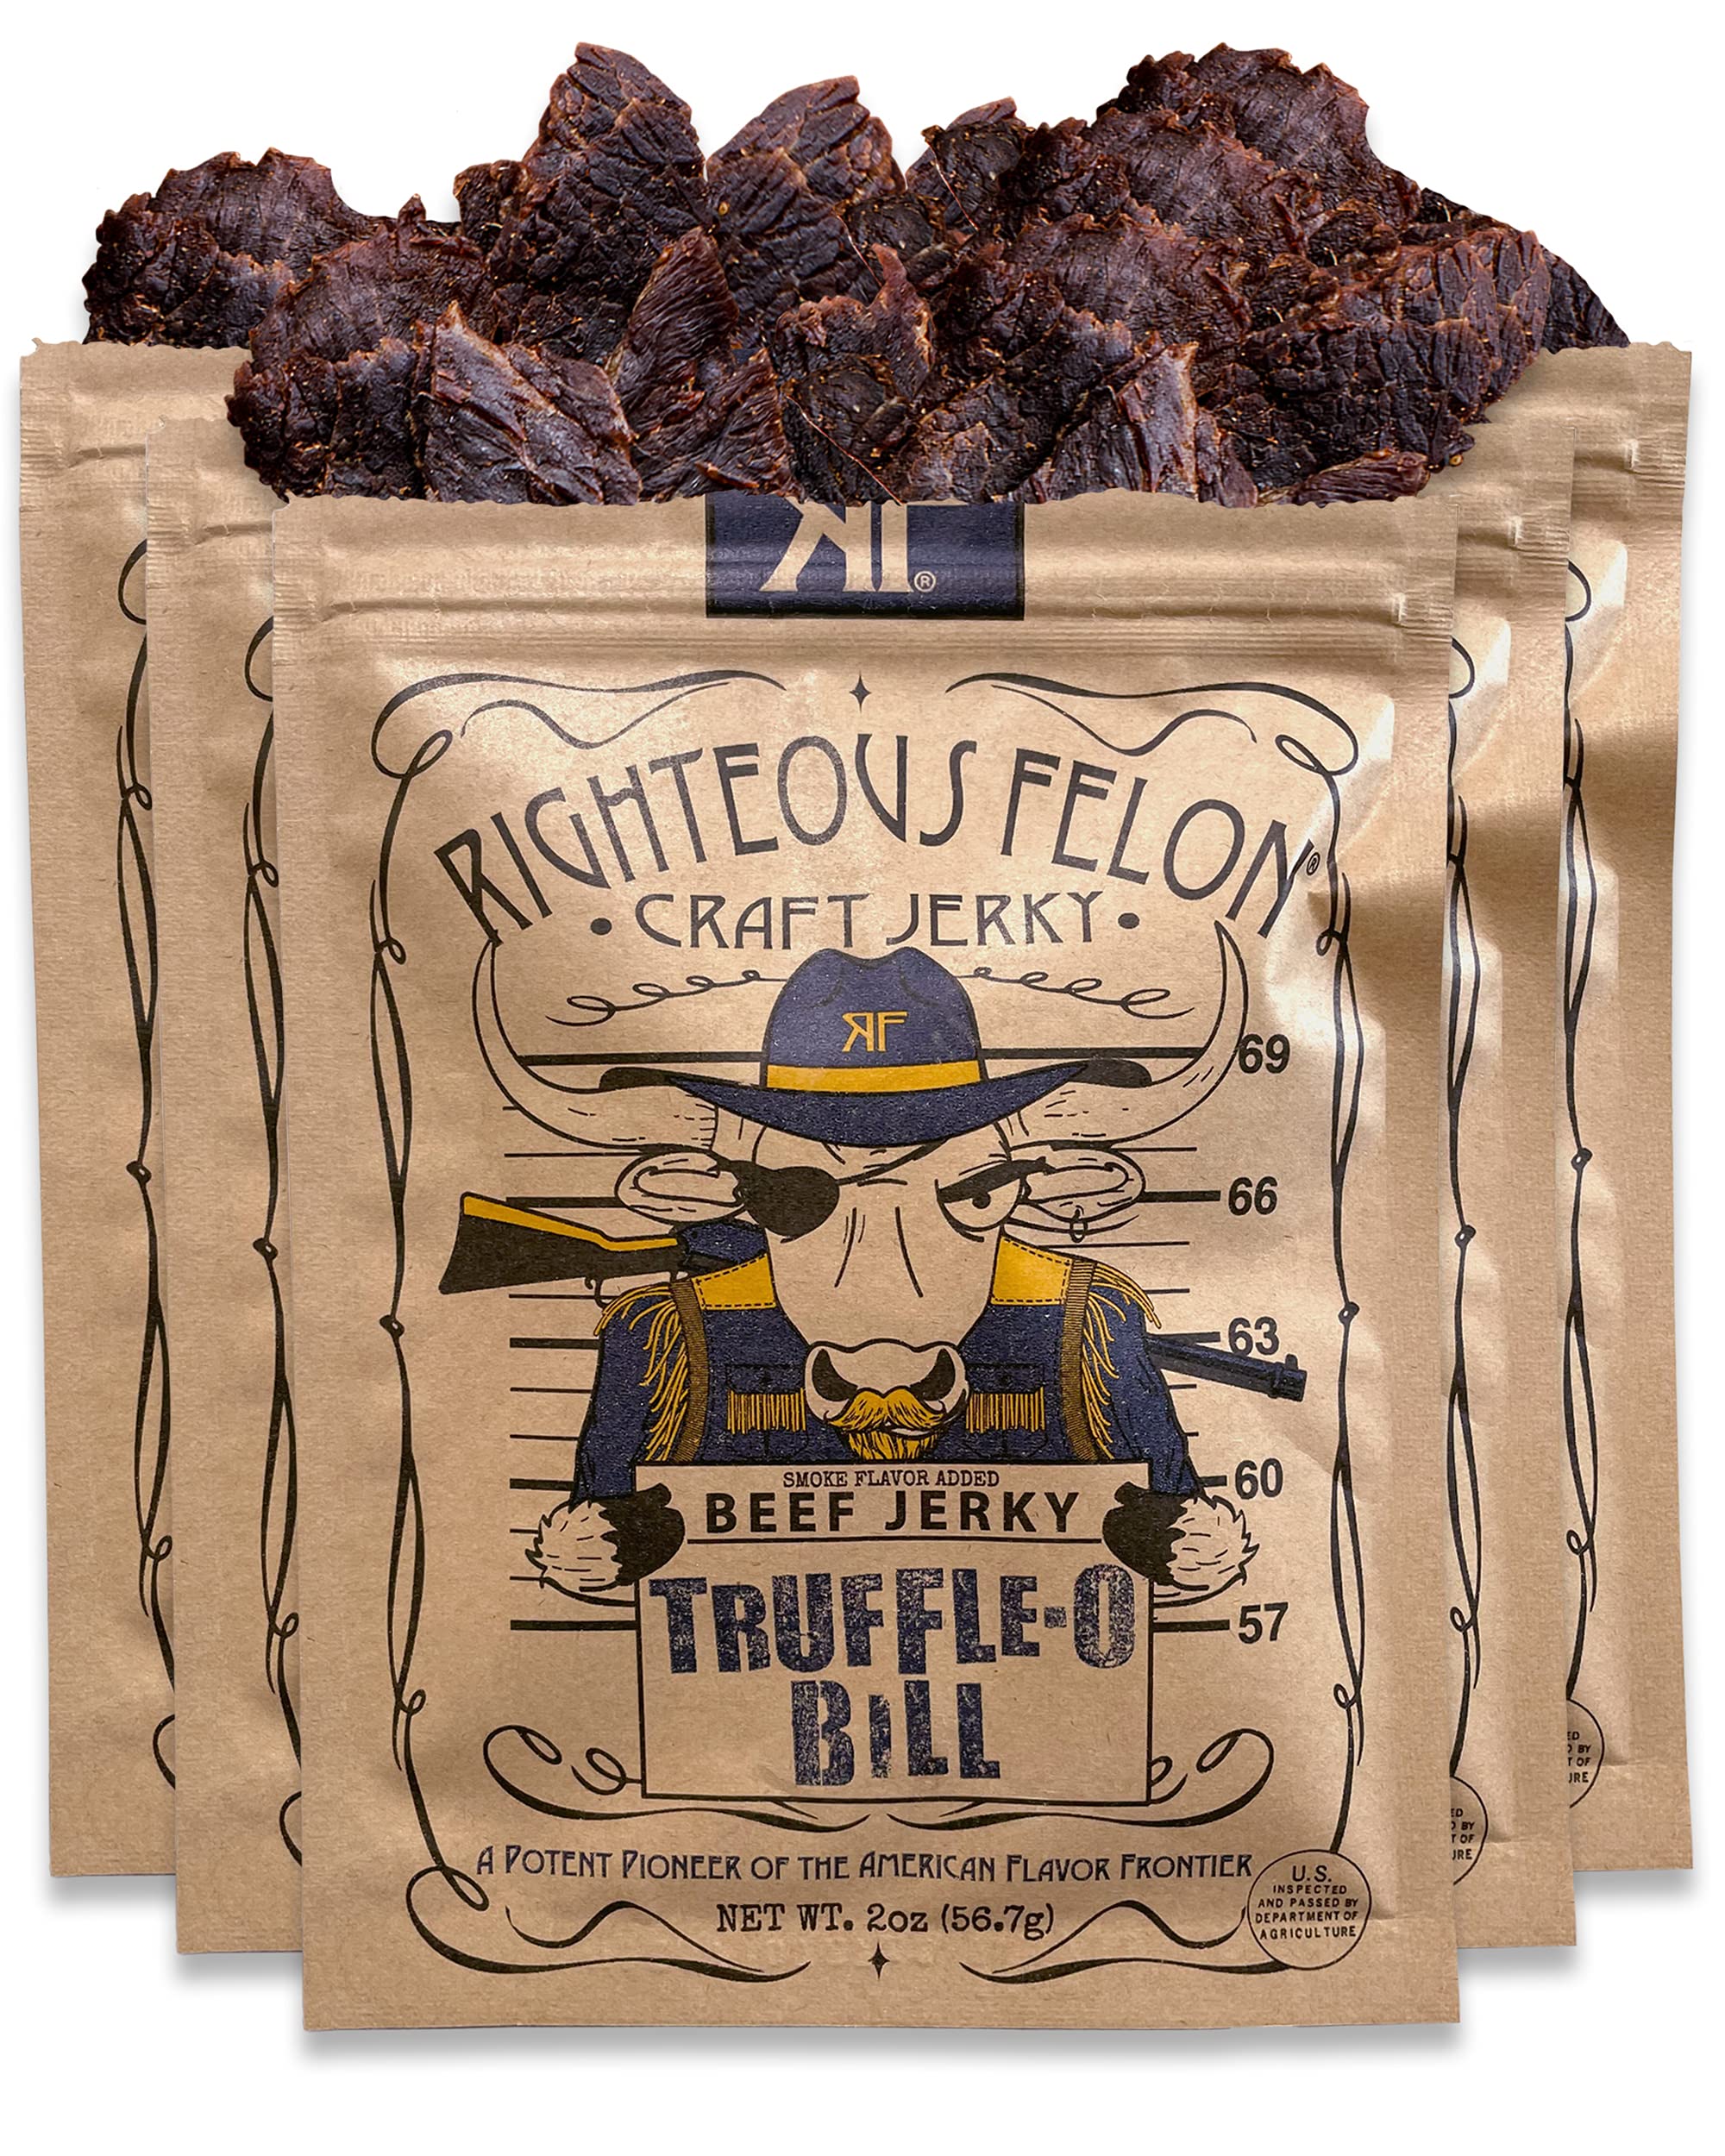 Righteous Felon Beef Jerky - Truffle-O-Soldier Flavor - All-Natural Jerky - Locally Sourced & Dried Beef Jerky - Low-Sugar High-